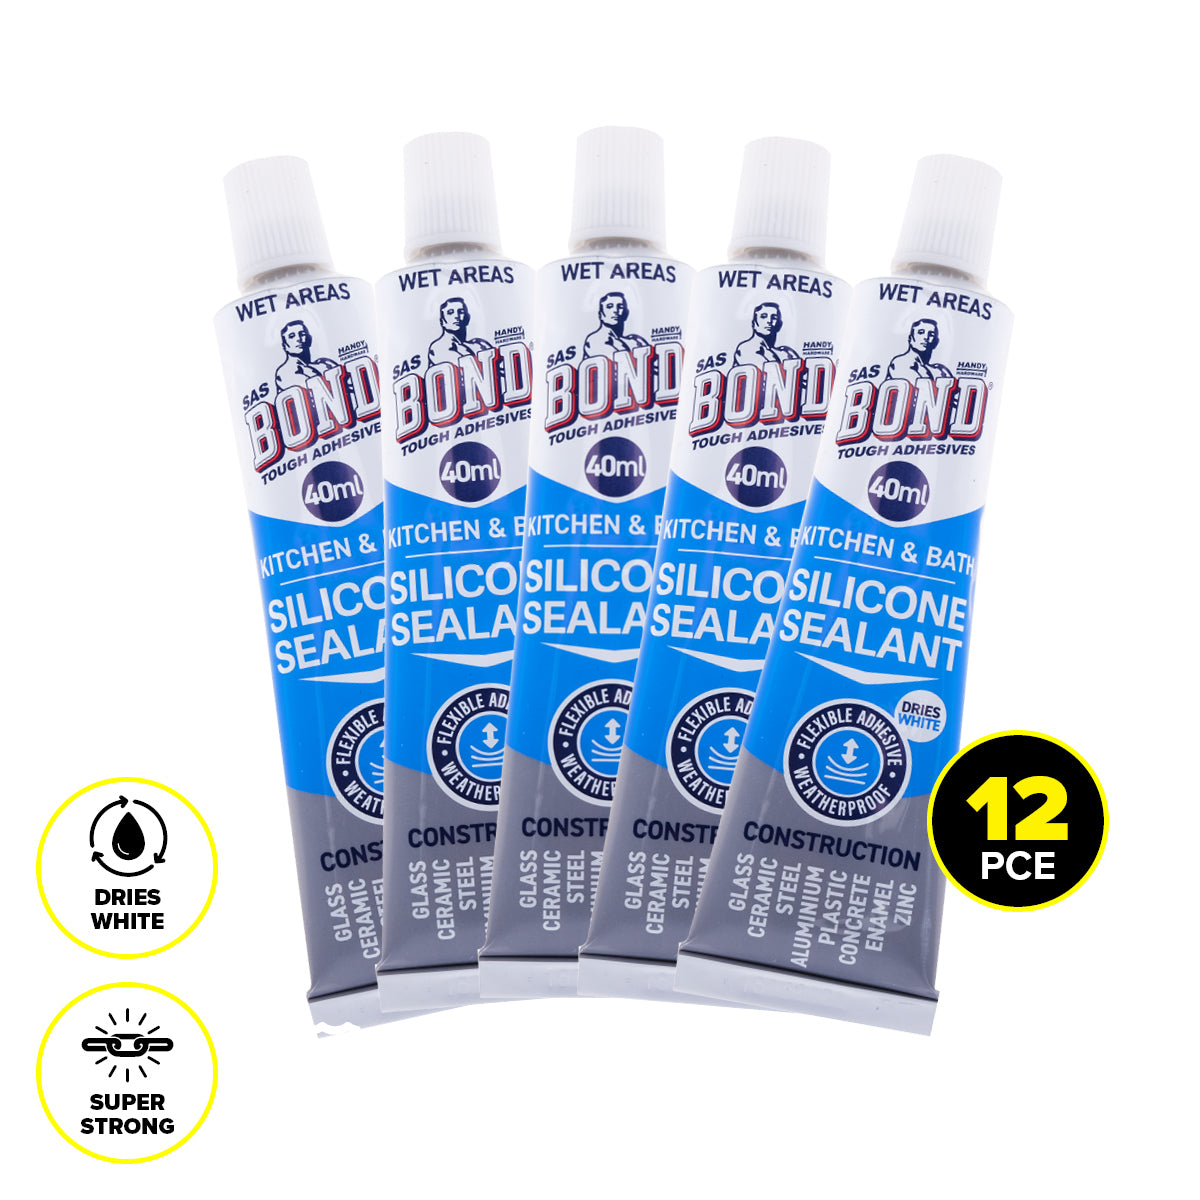 Handy Hardware 12PCE Silicone Sealant Gap Filler Paintable High Strength 40ml